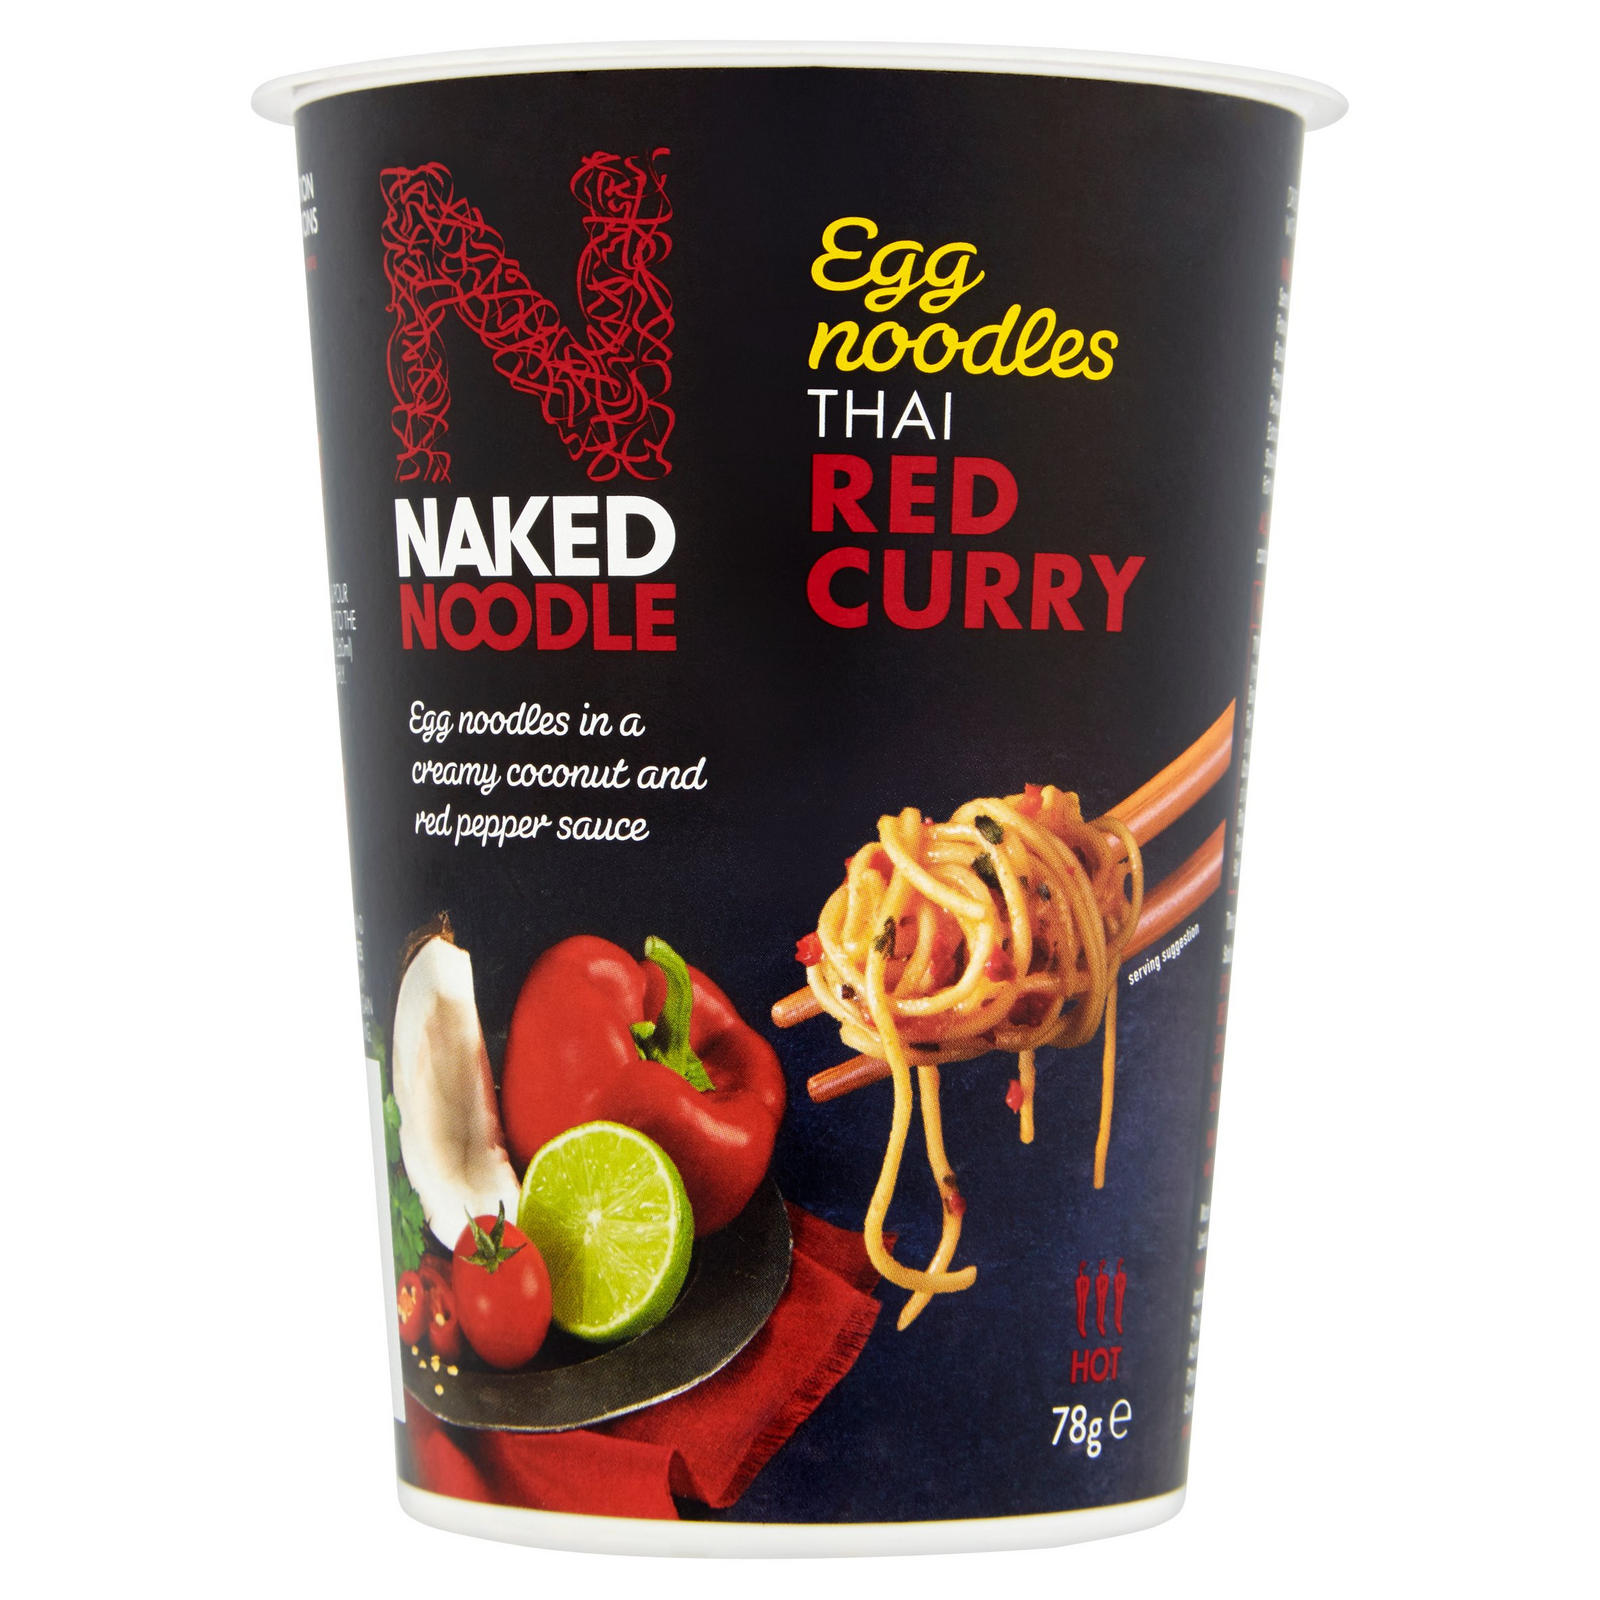 Naked Noodle Thai Massaman Curry 78g Dried Egg Noodles in 